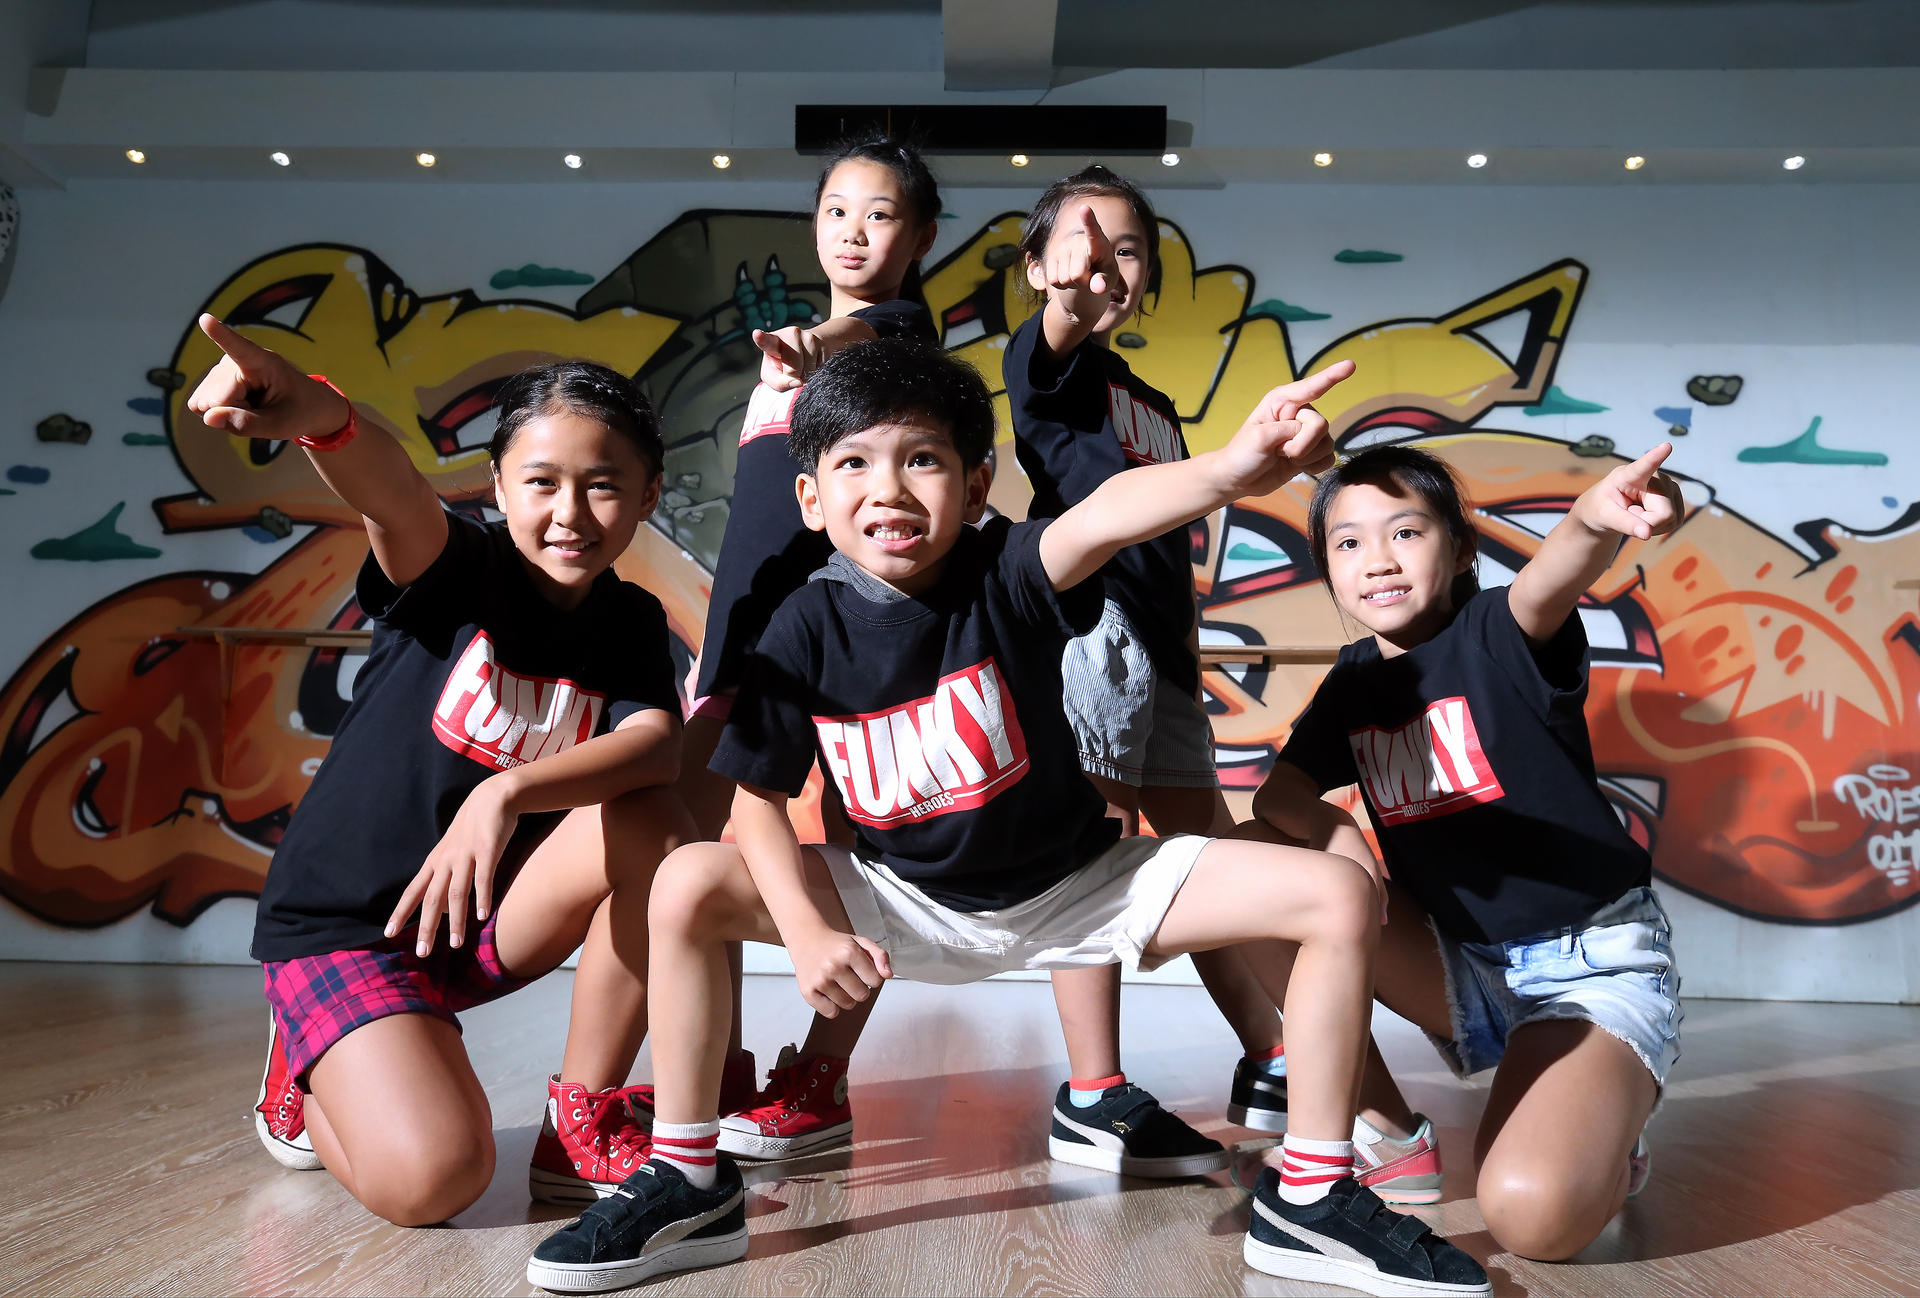 The dancers seek to energise support for the city's street culture. Photo: K.Y. Cheng